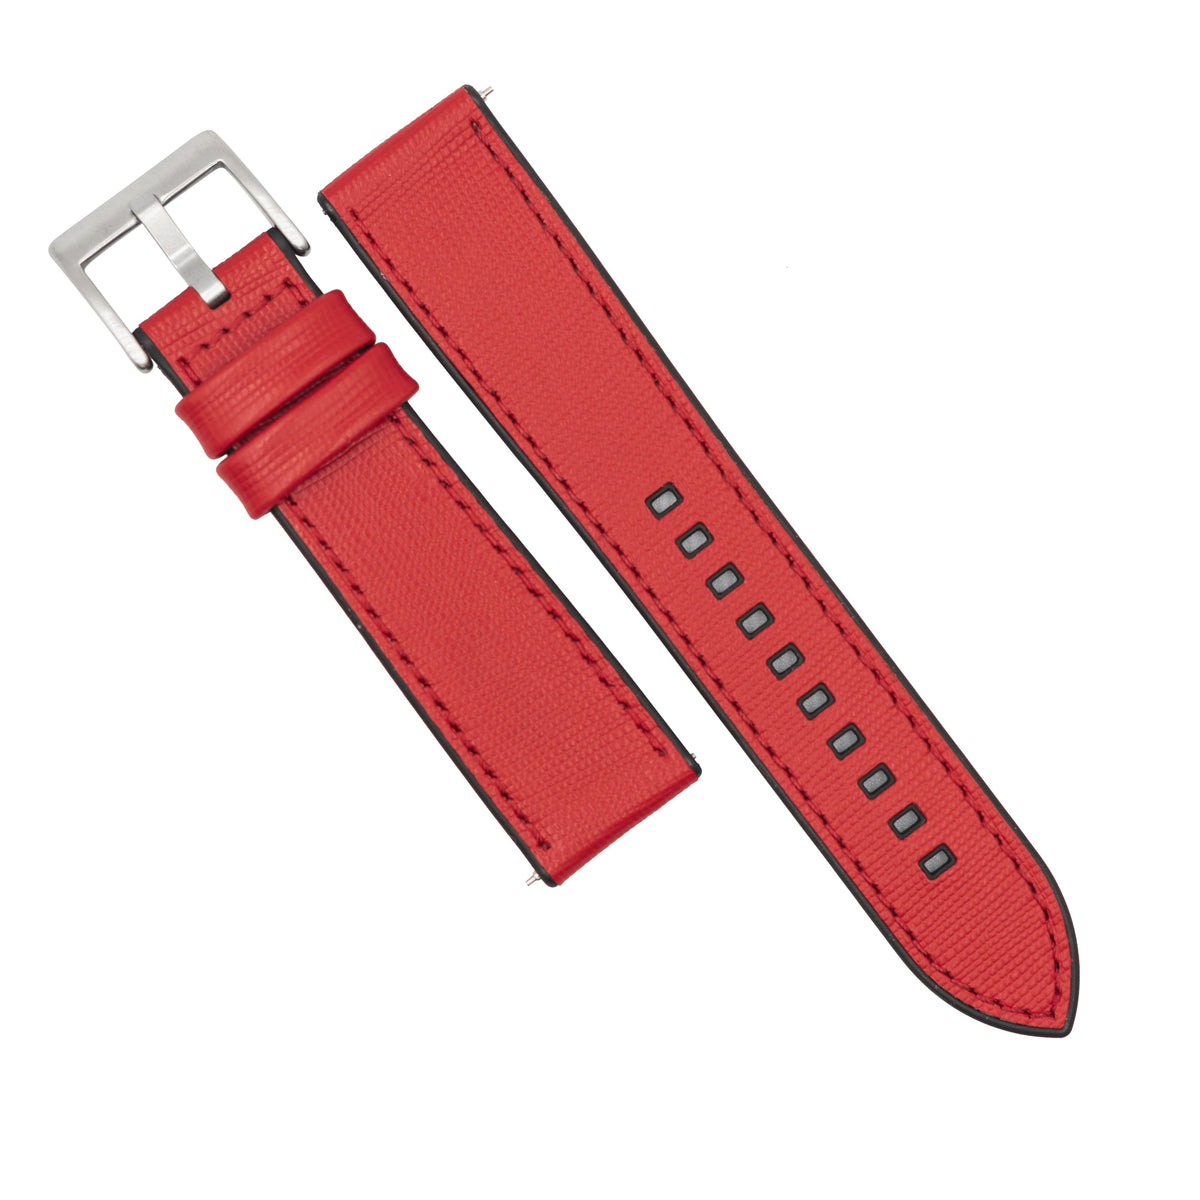 Performax Saffiano Leather FKM Rubber Hybrid Strap in Red (20mm) - Nomad Watch Works MY